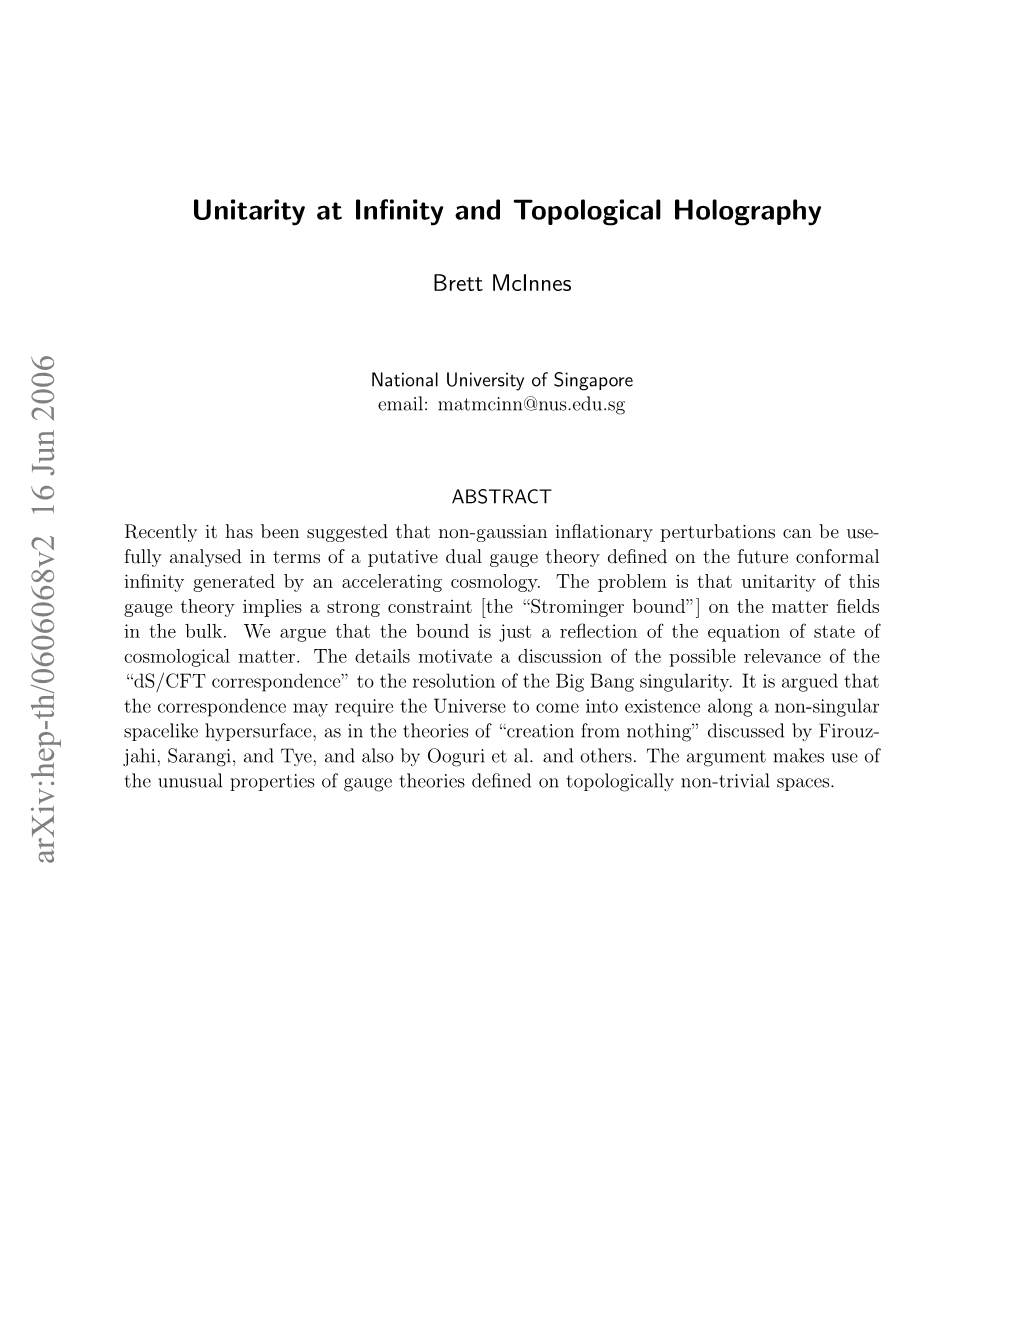 Unitarity at Infinity and Topological Holography